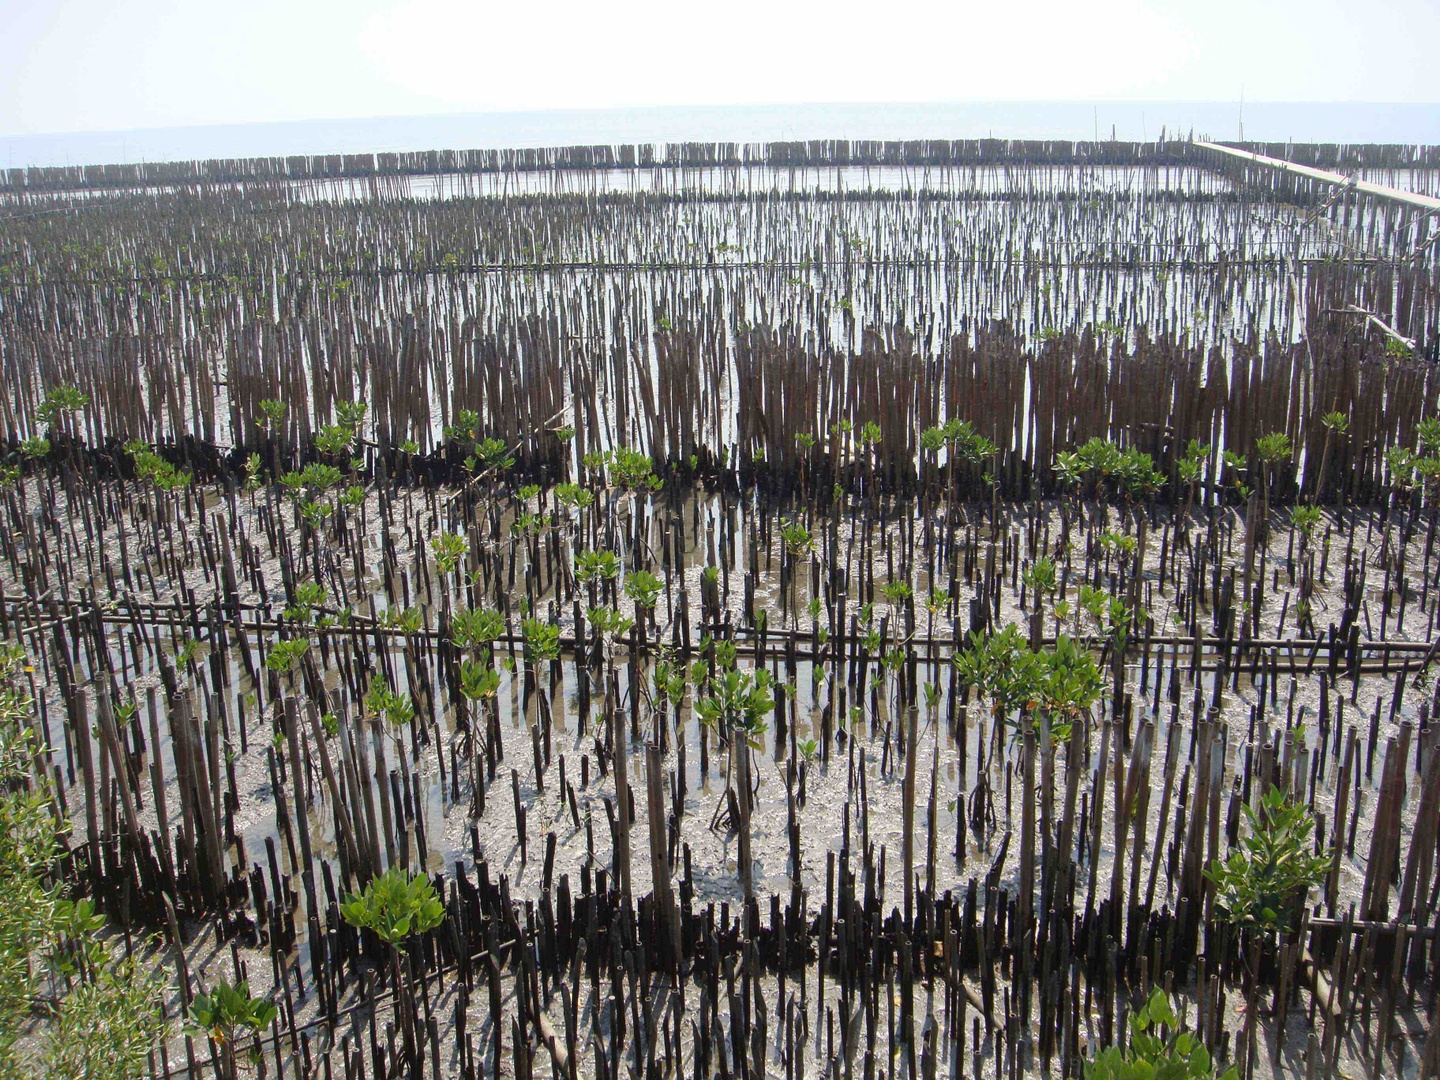 Photo of Landscape Technology Installation for Land Retreat and Mangrove Reconstruction in the Gulf of Thailand. Photo features a densely packed field of rows and rows of sticks planted vertically, some with leaves growing from them.